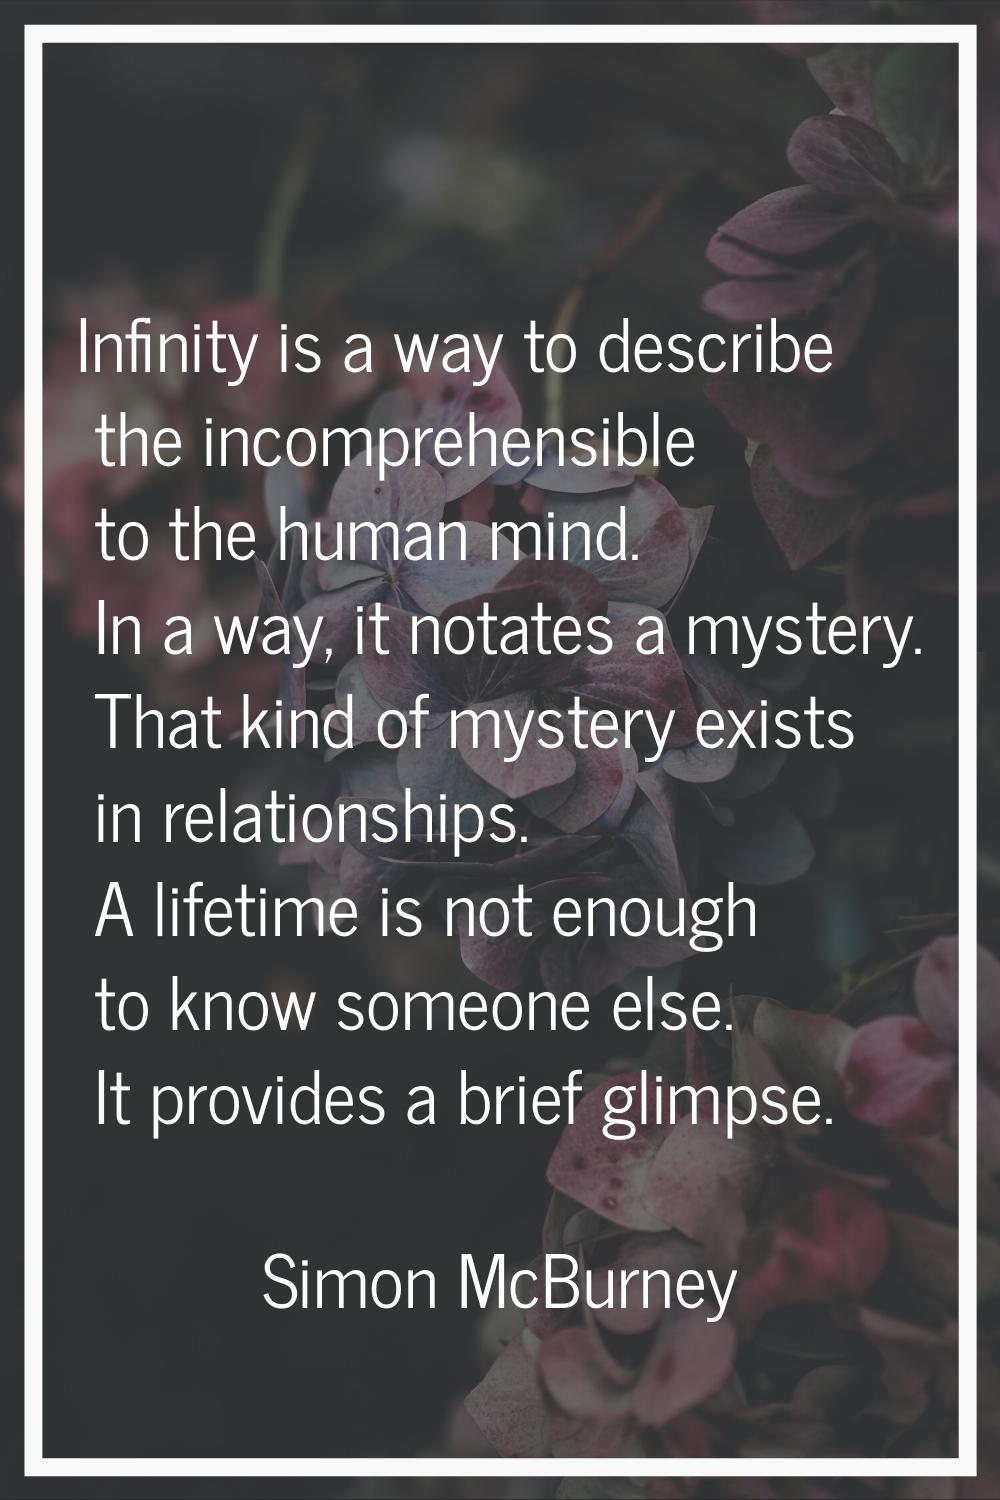 Infinity is a way to describe the incomprehensible to the human mind. In a way, it notates a myster